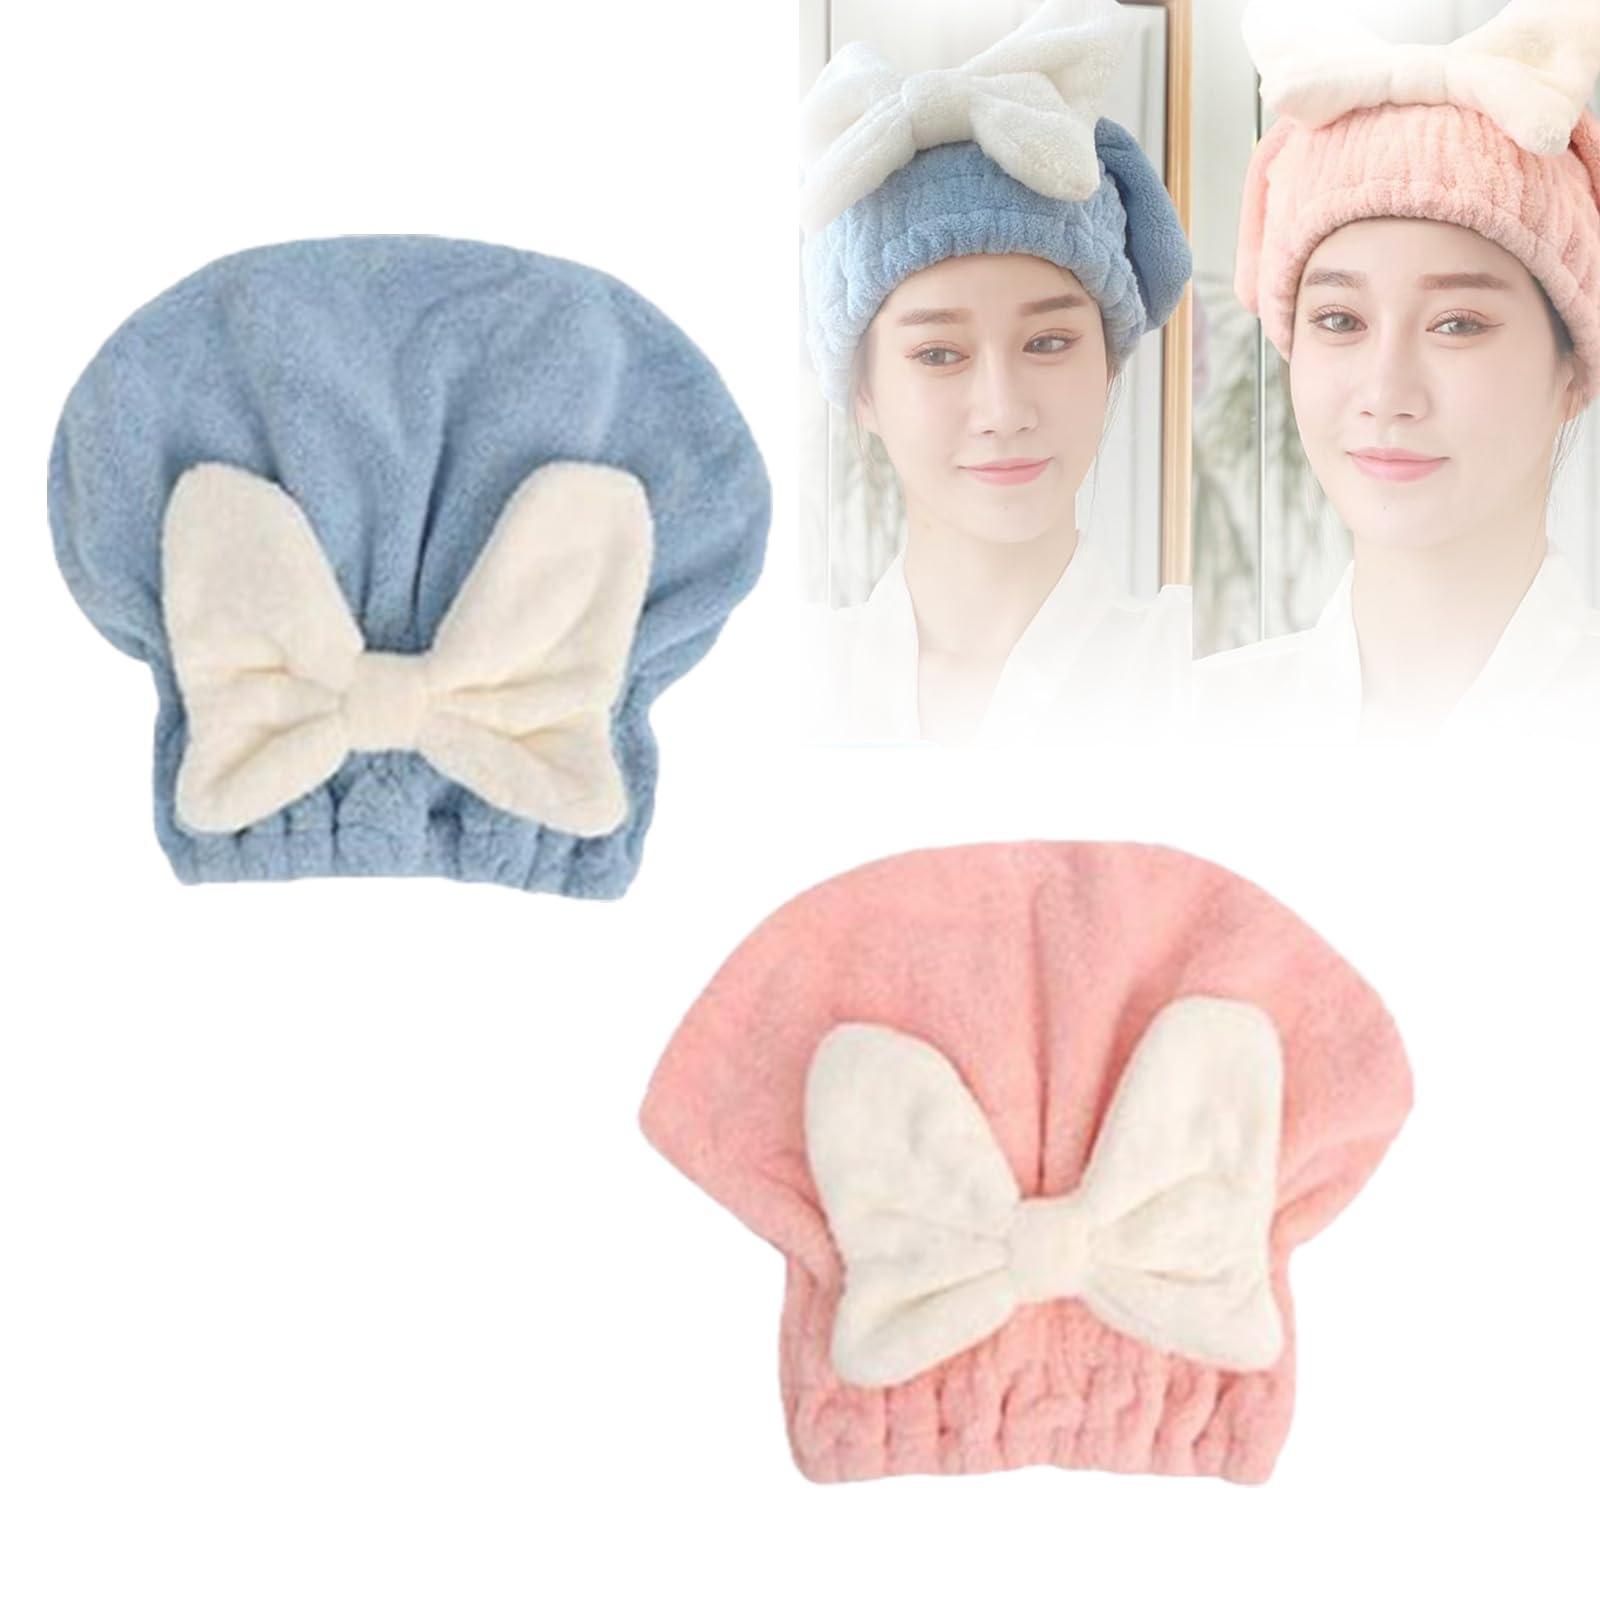 Jelaqmot 2PCS Super Absorbent Hair Towel Wrap for Wet Hair, Microfiber Hair Drying Towels Head Wrap with Bow-Knot Shower Cap for Women Drying Curly Long & Thick Hair (D,ONE Size)